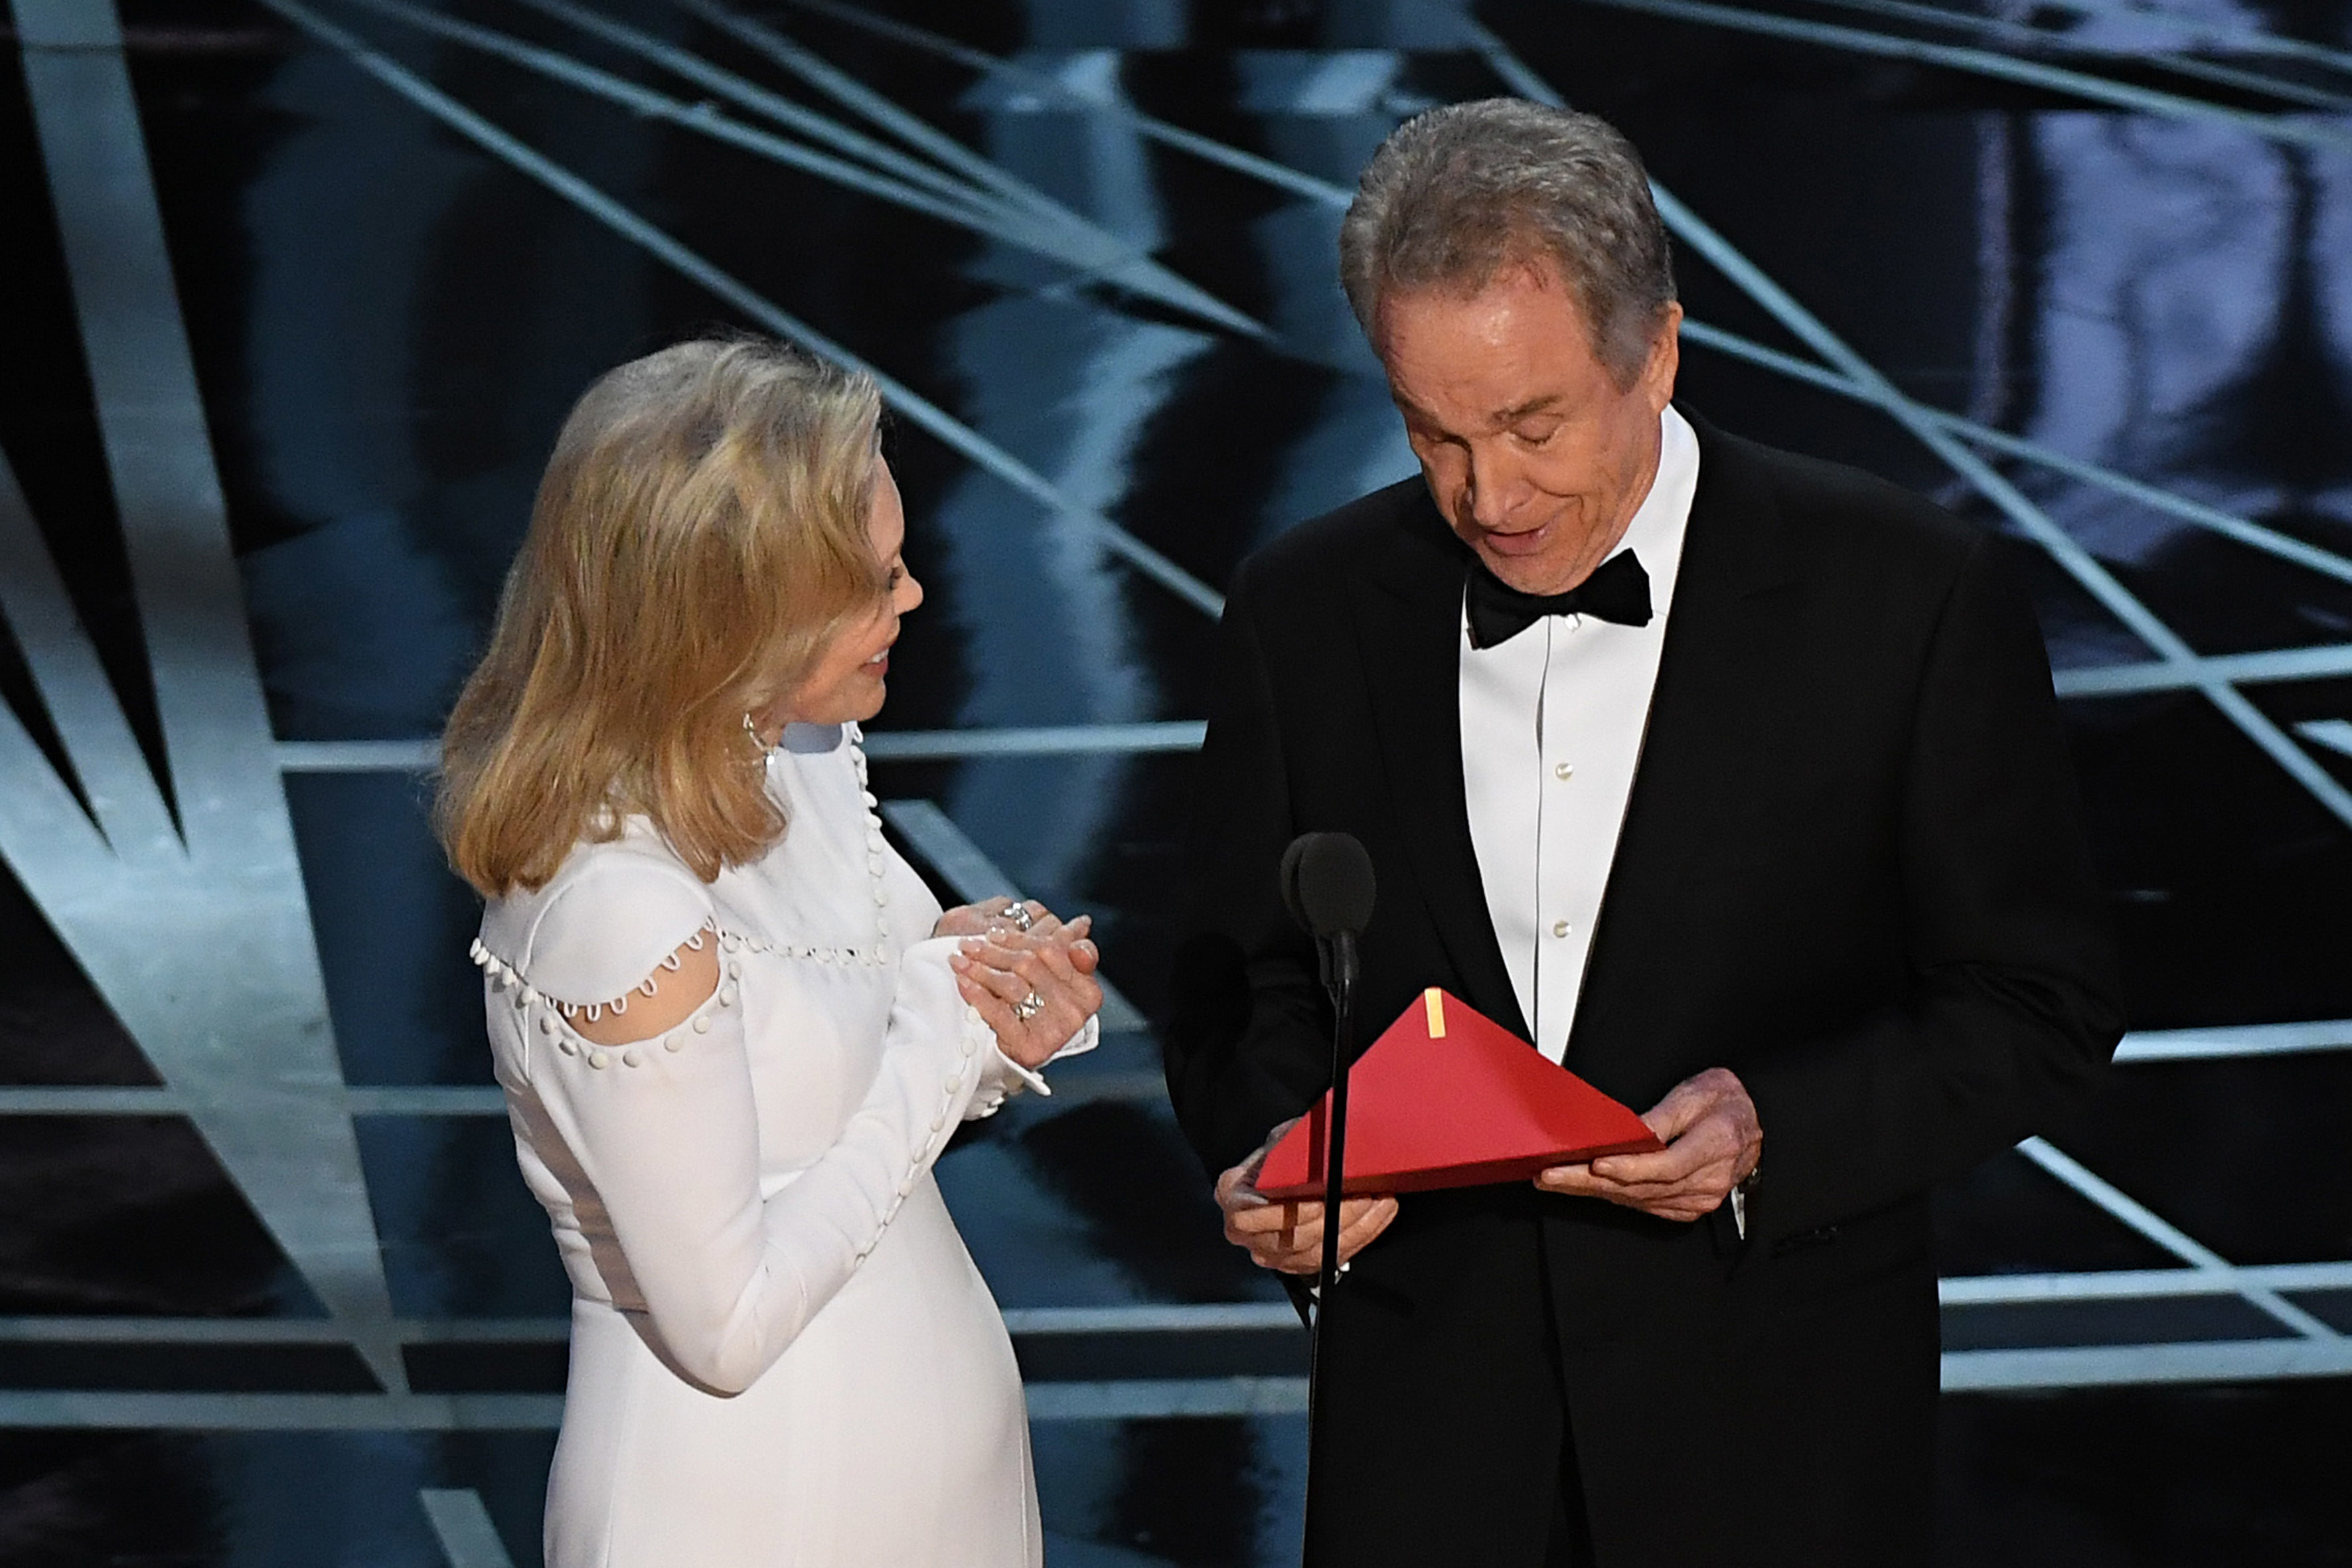 Warren Beatty onstage with Faye Dunaway at the 2017 Oscars